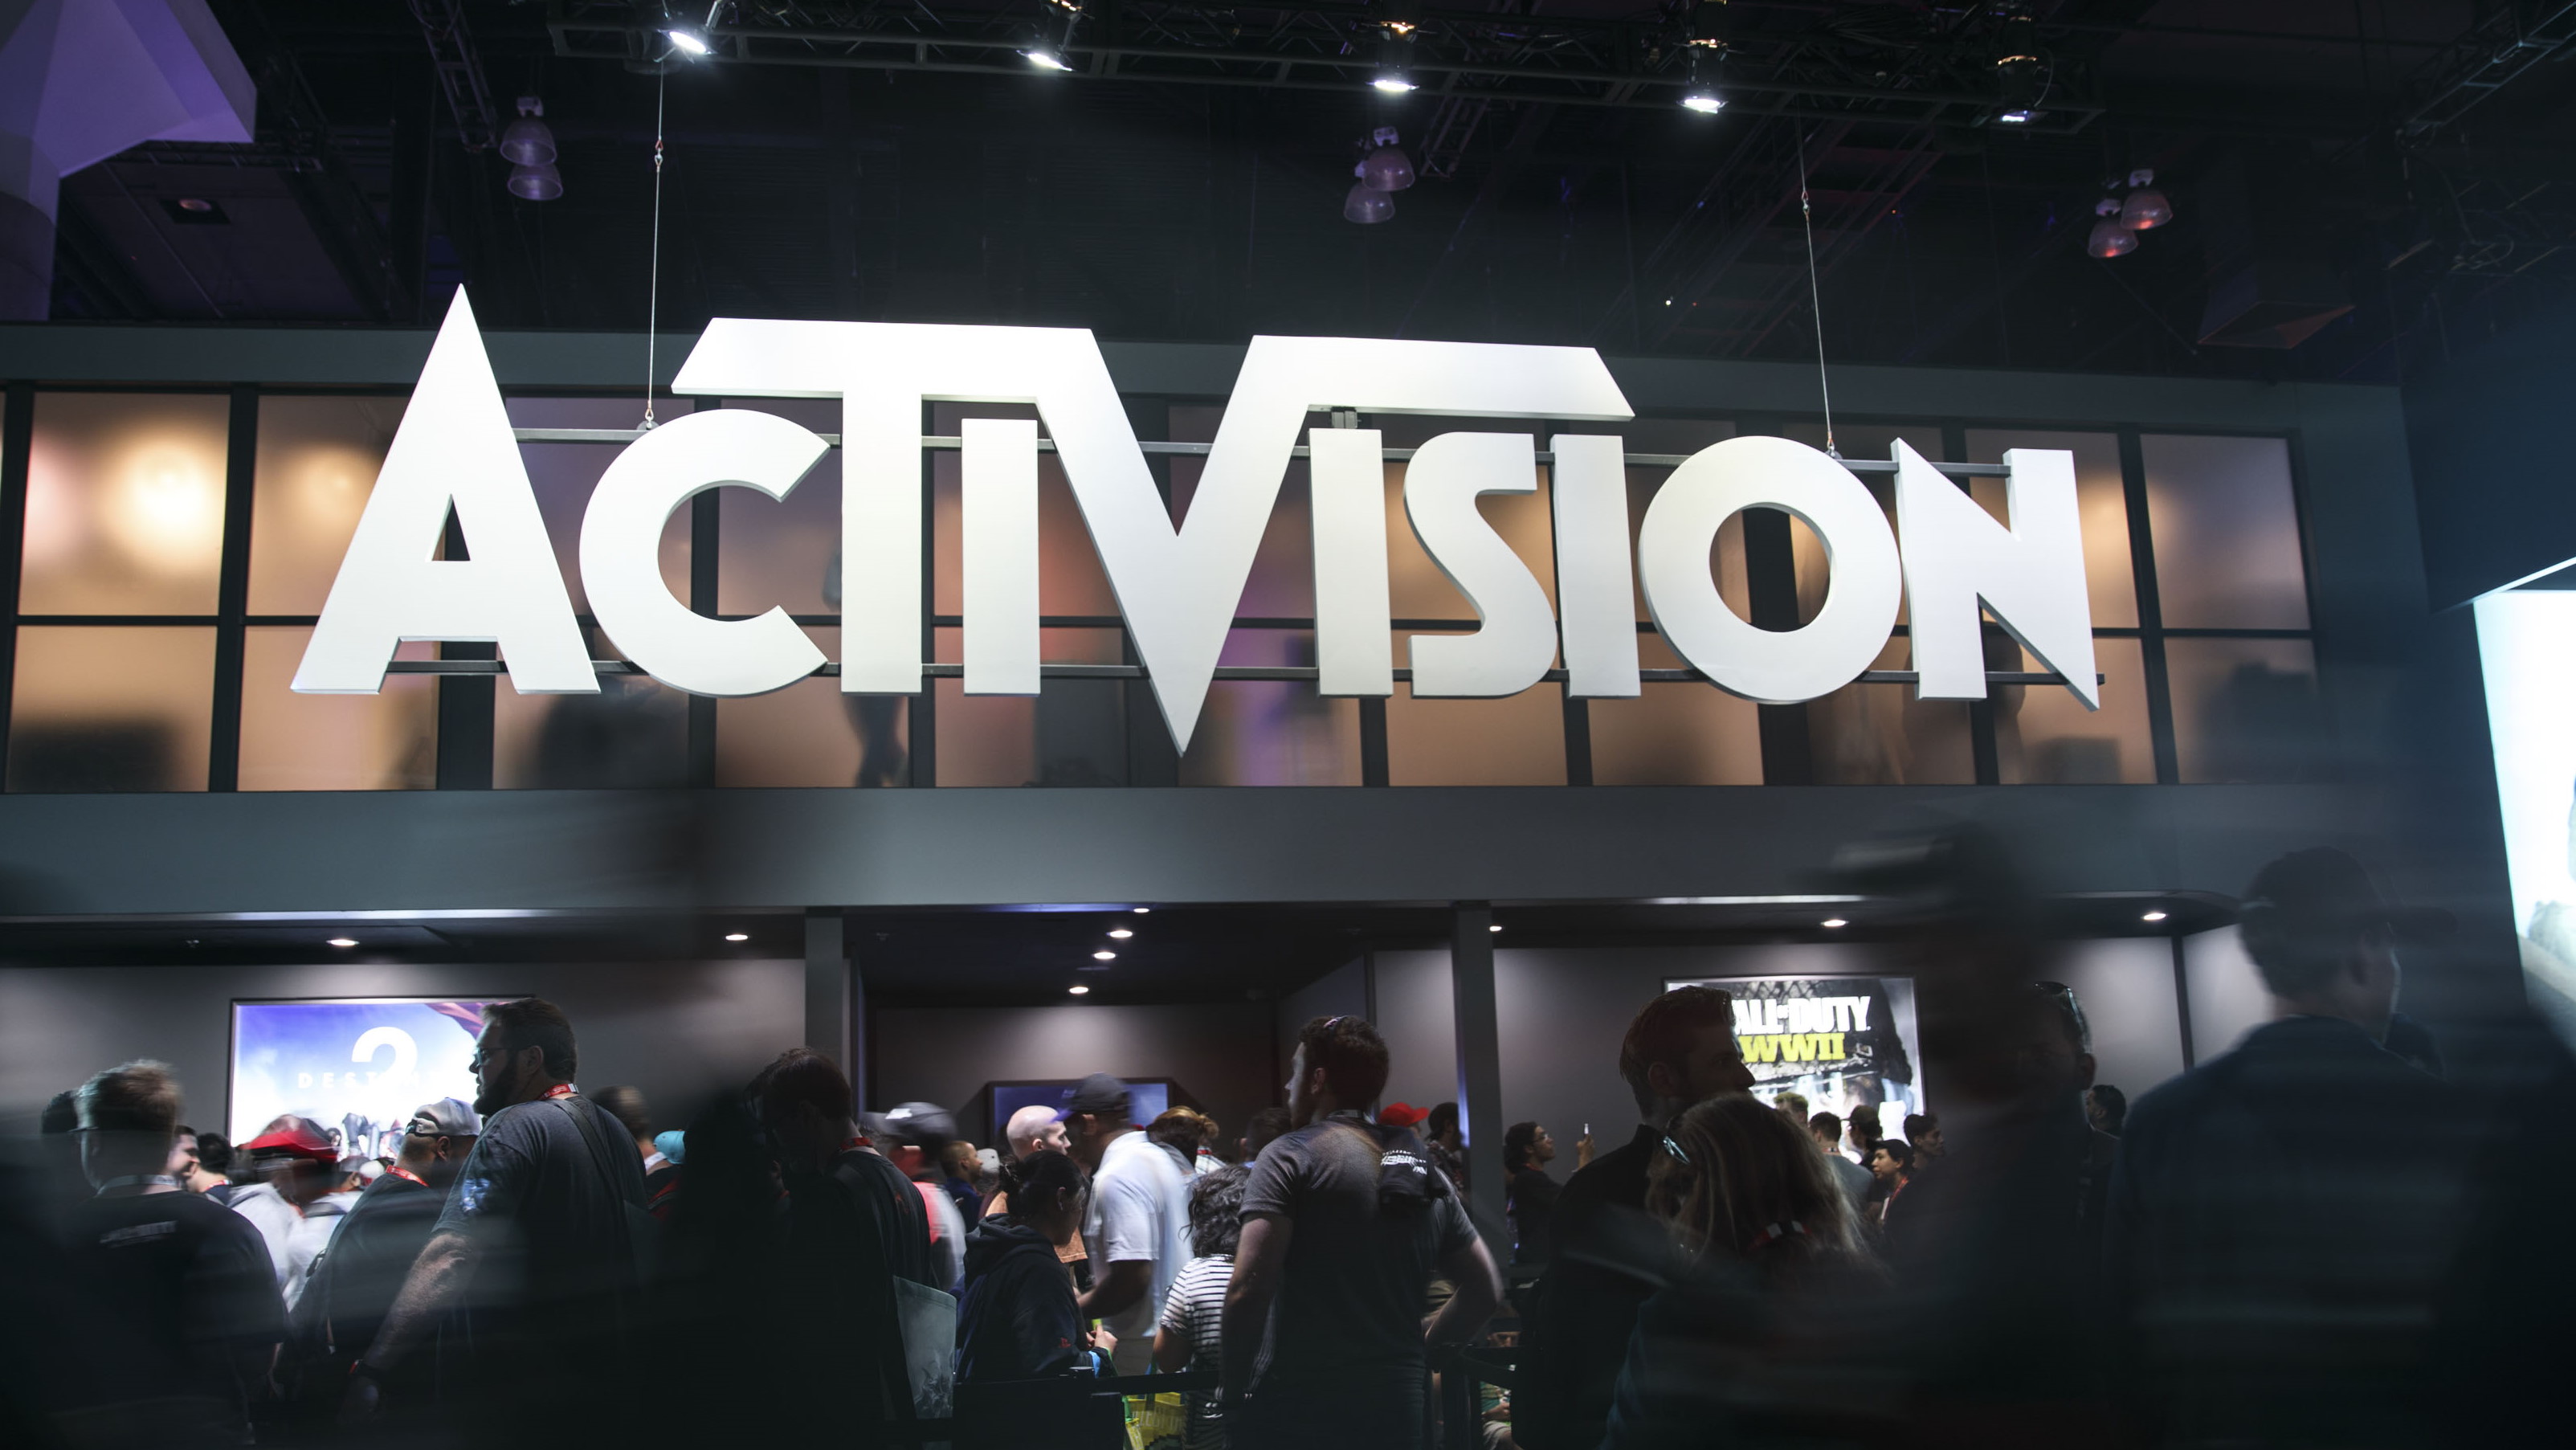  Activision urges shareholders to vote against proposed misconduct report 